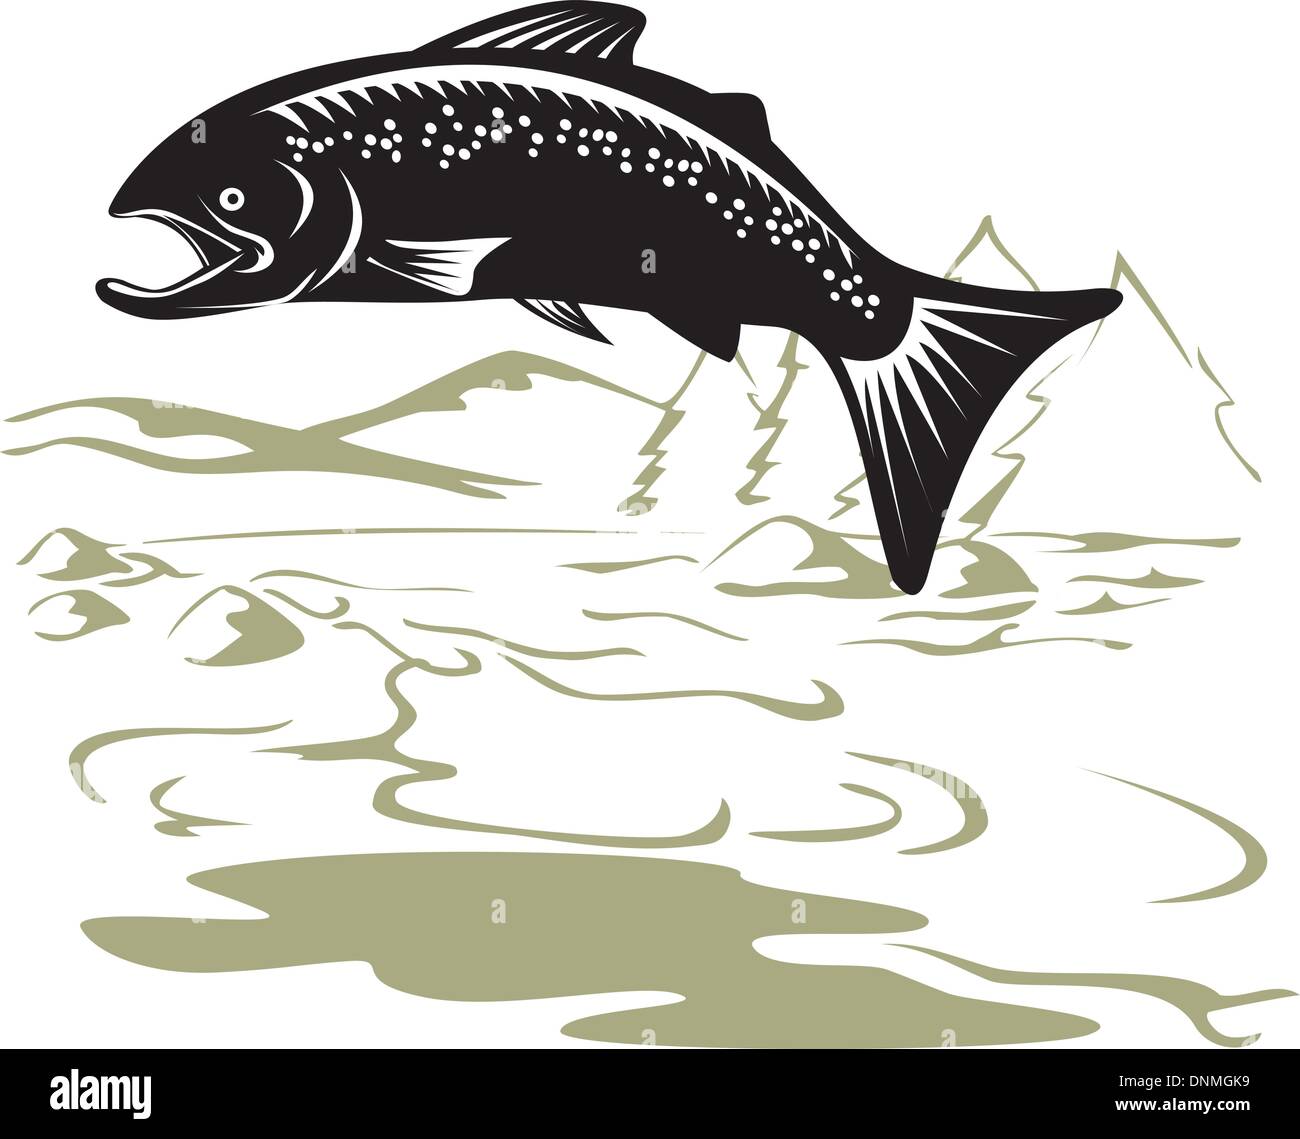 Illustration of a salmon fish jumping with mountains in the background done in retro style. Stock Vector